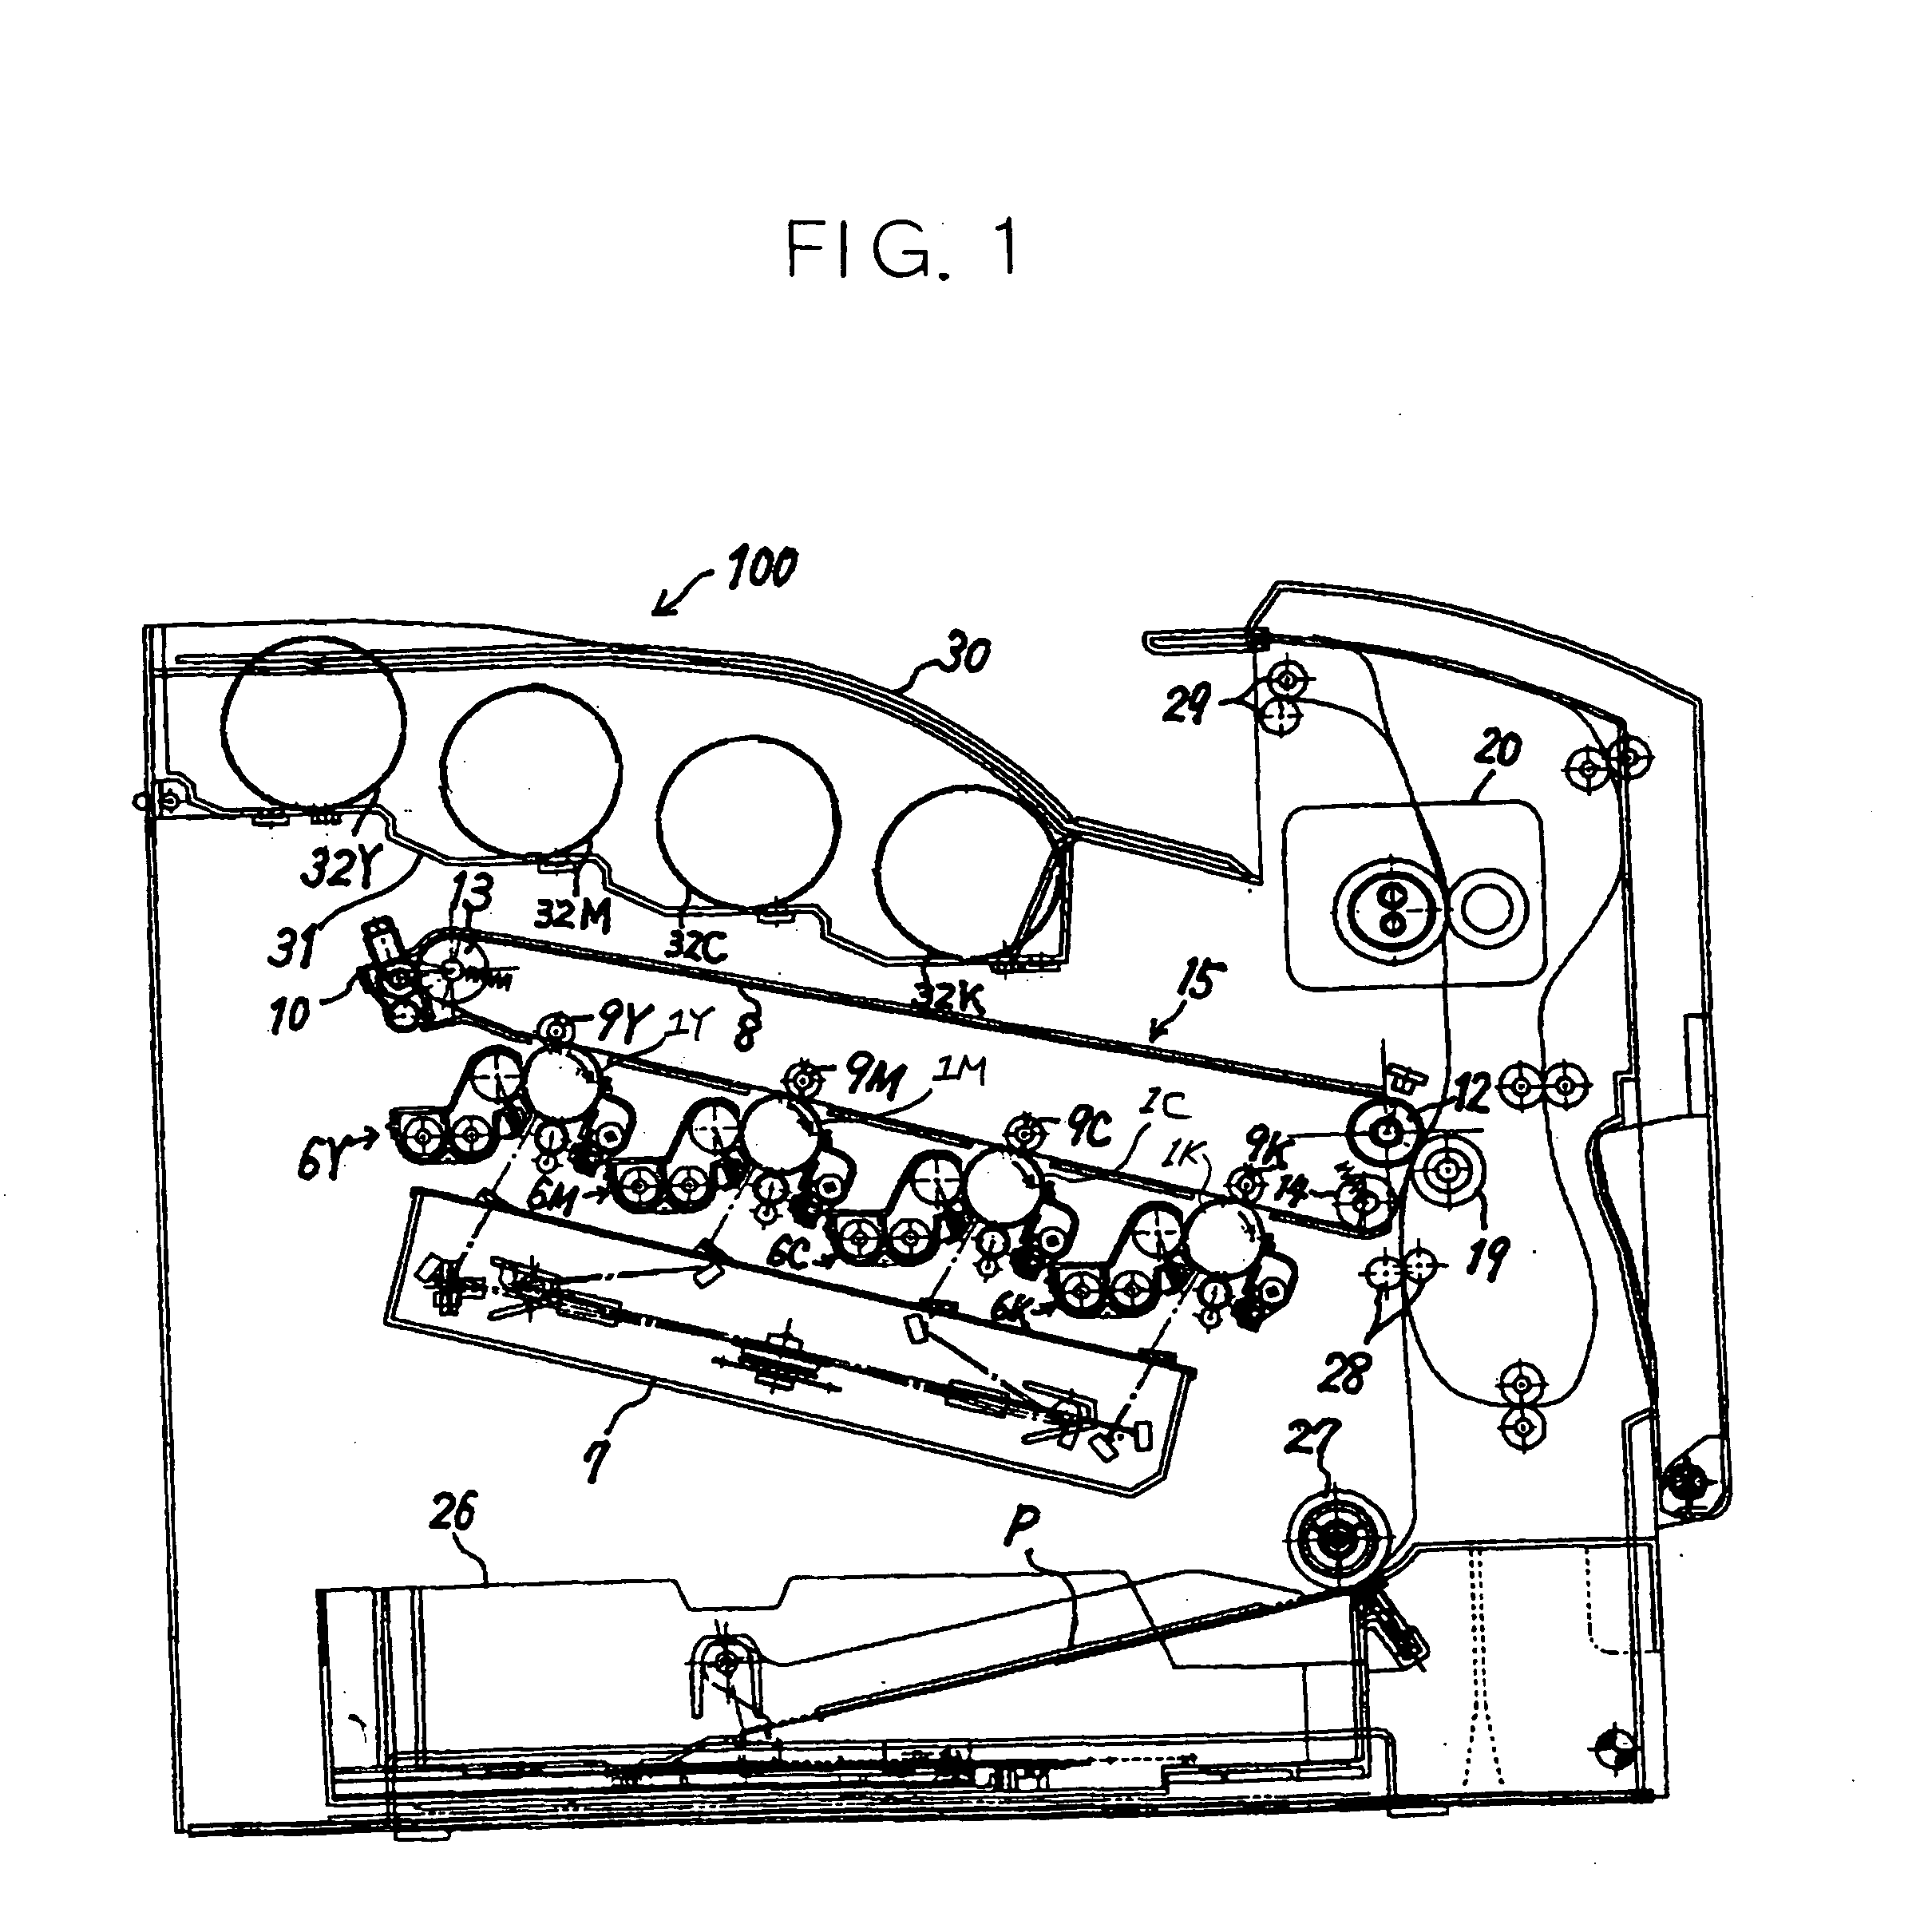 Image forming apparatus using a toner container and a process cartridge